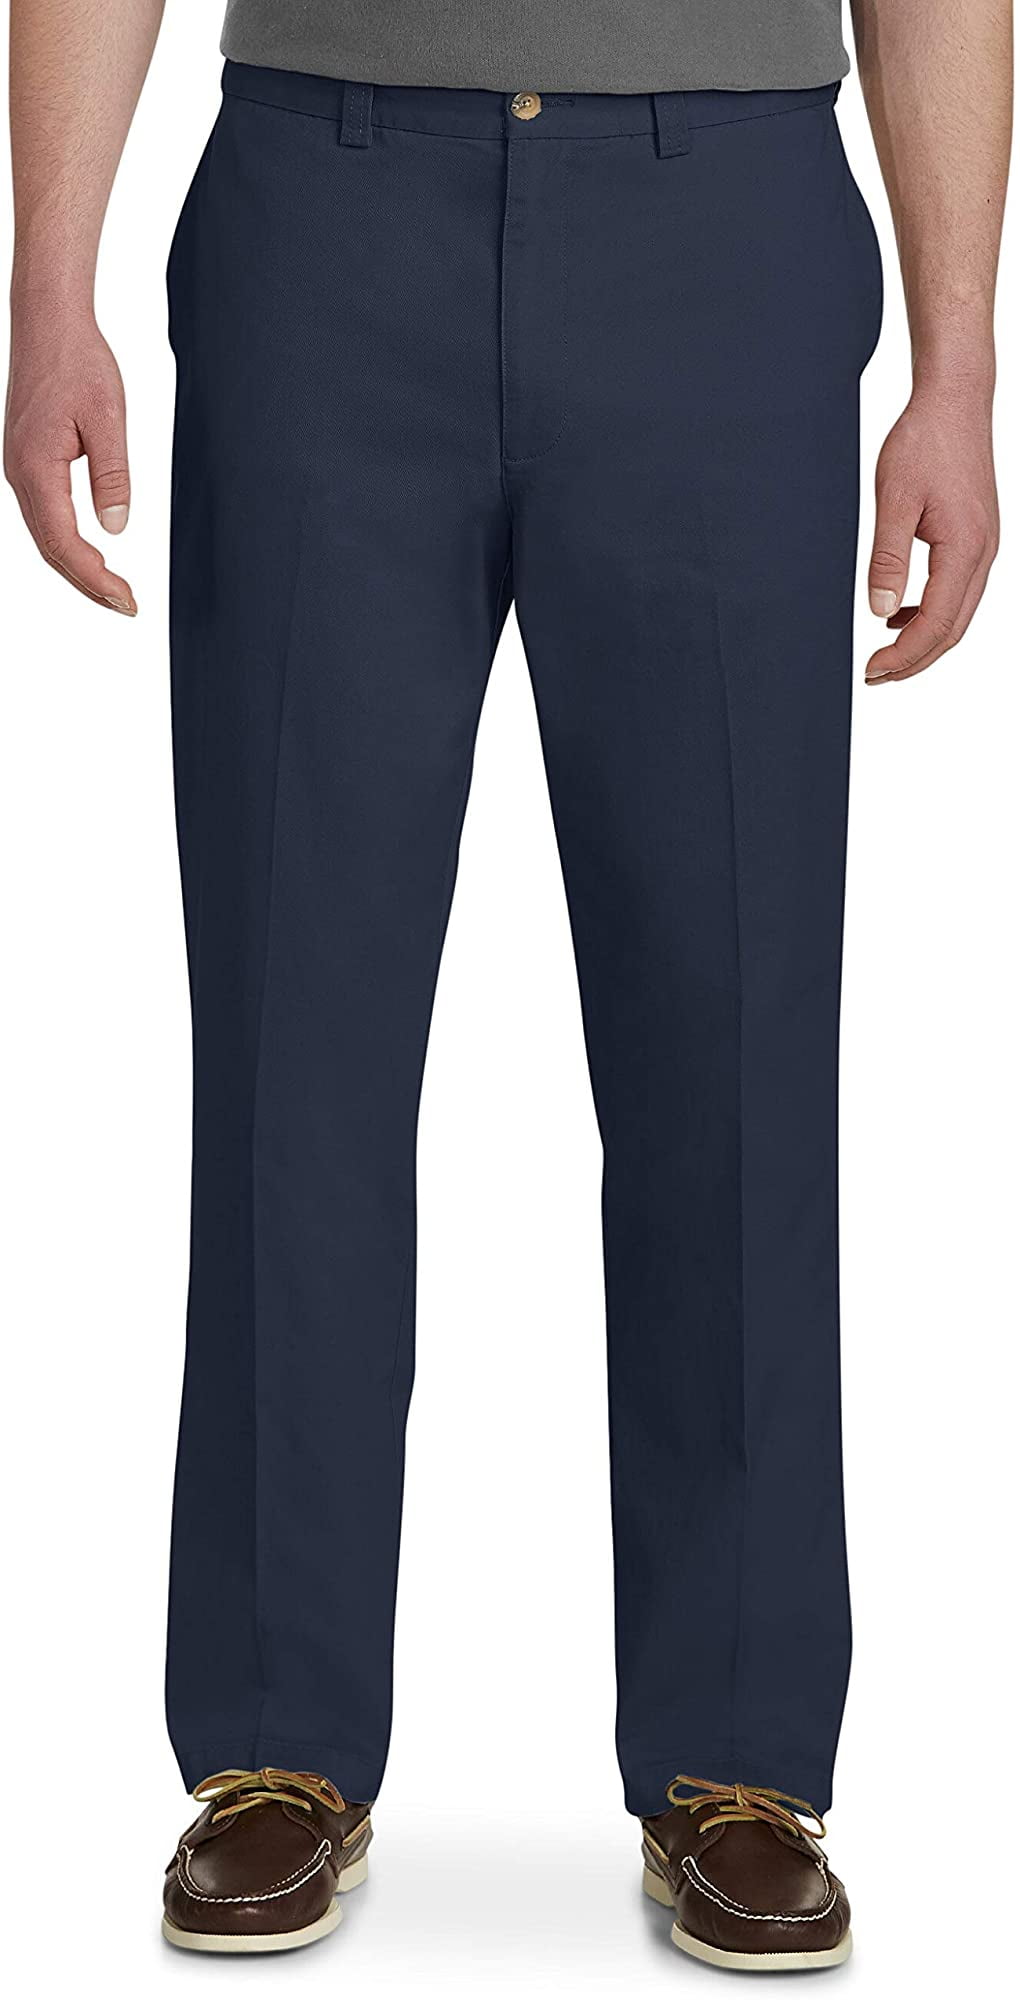 Harbor Bay by DXL Big and Tall Waist-Relaxer Pants8211 Unhemmed ...